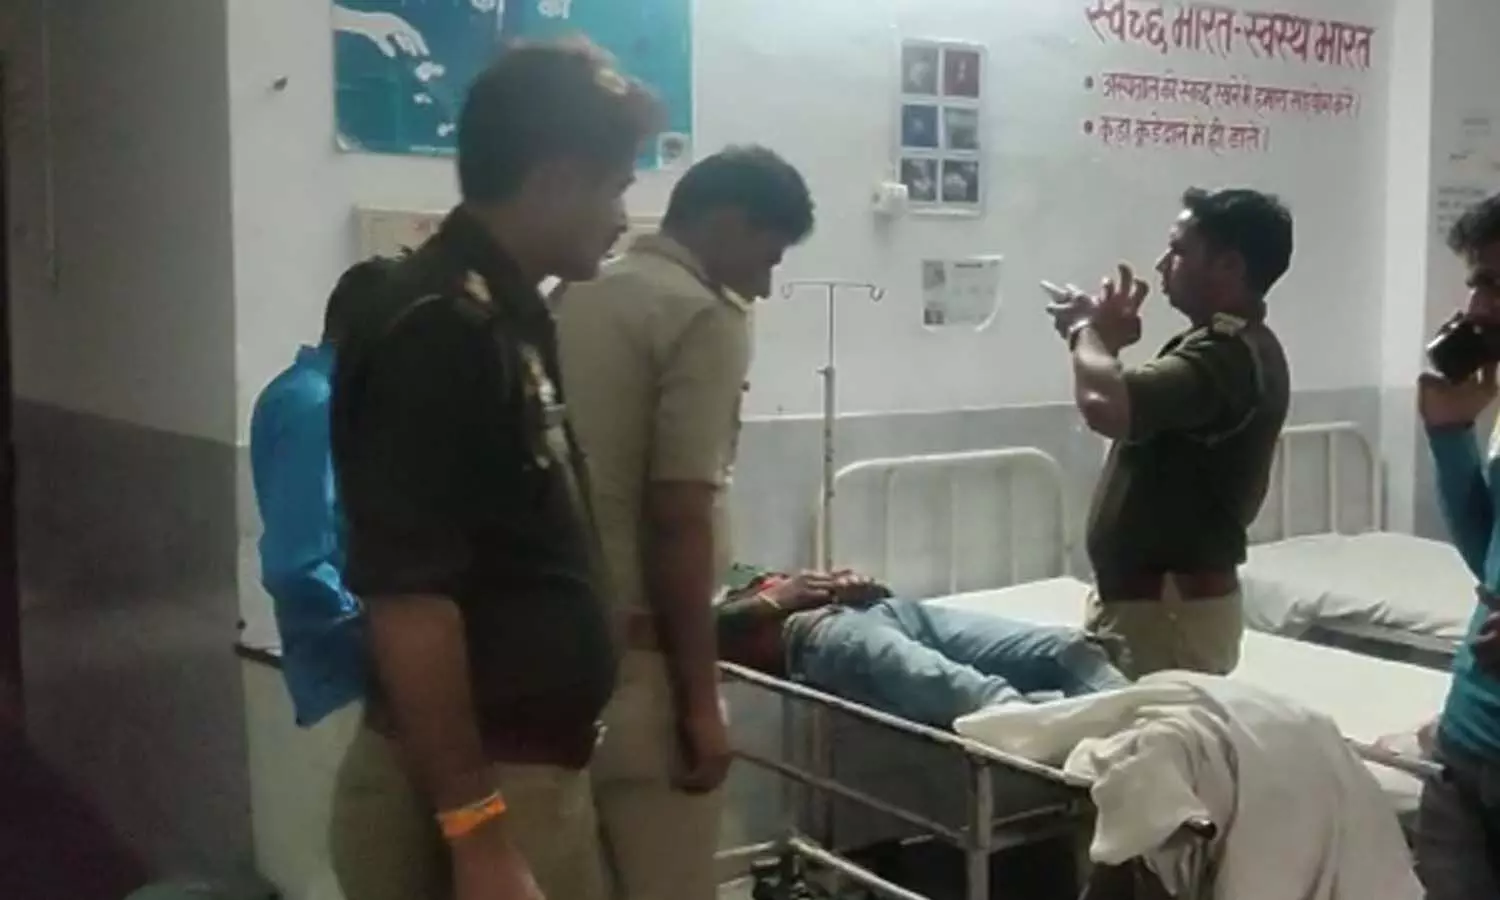 One youth died in a road accident in Firozabad, more than half a dozen injured